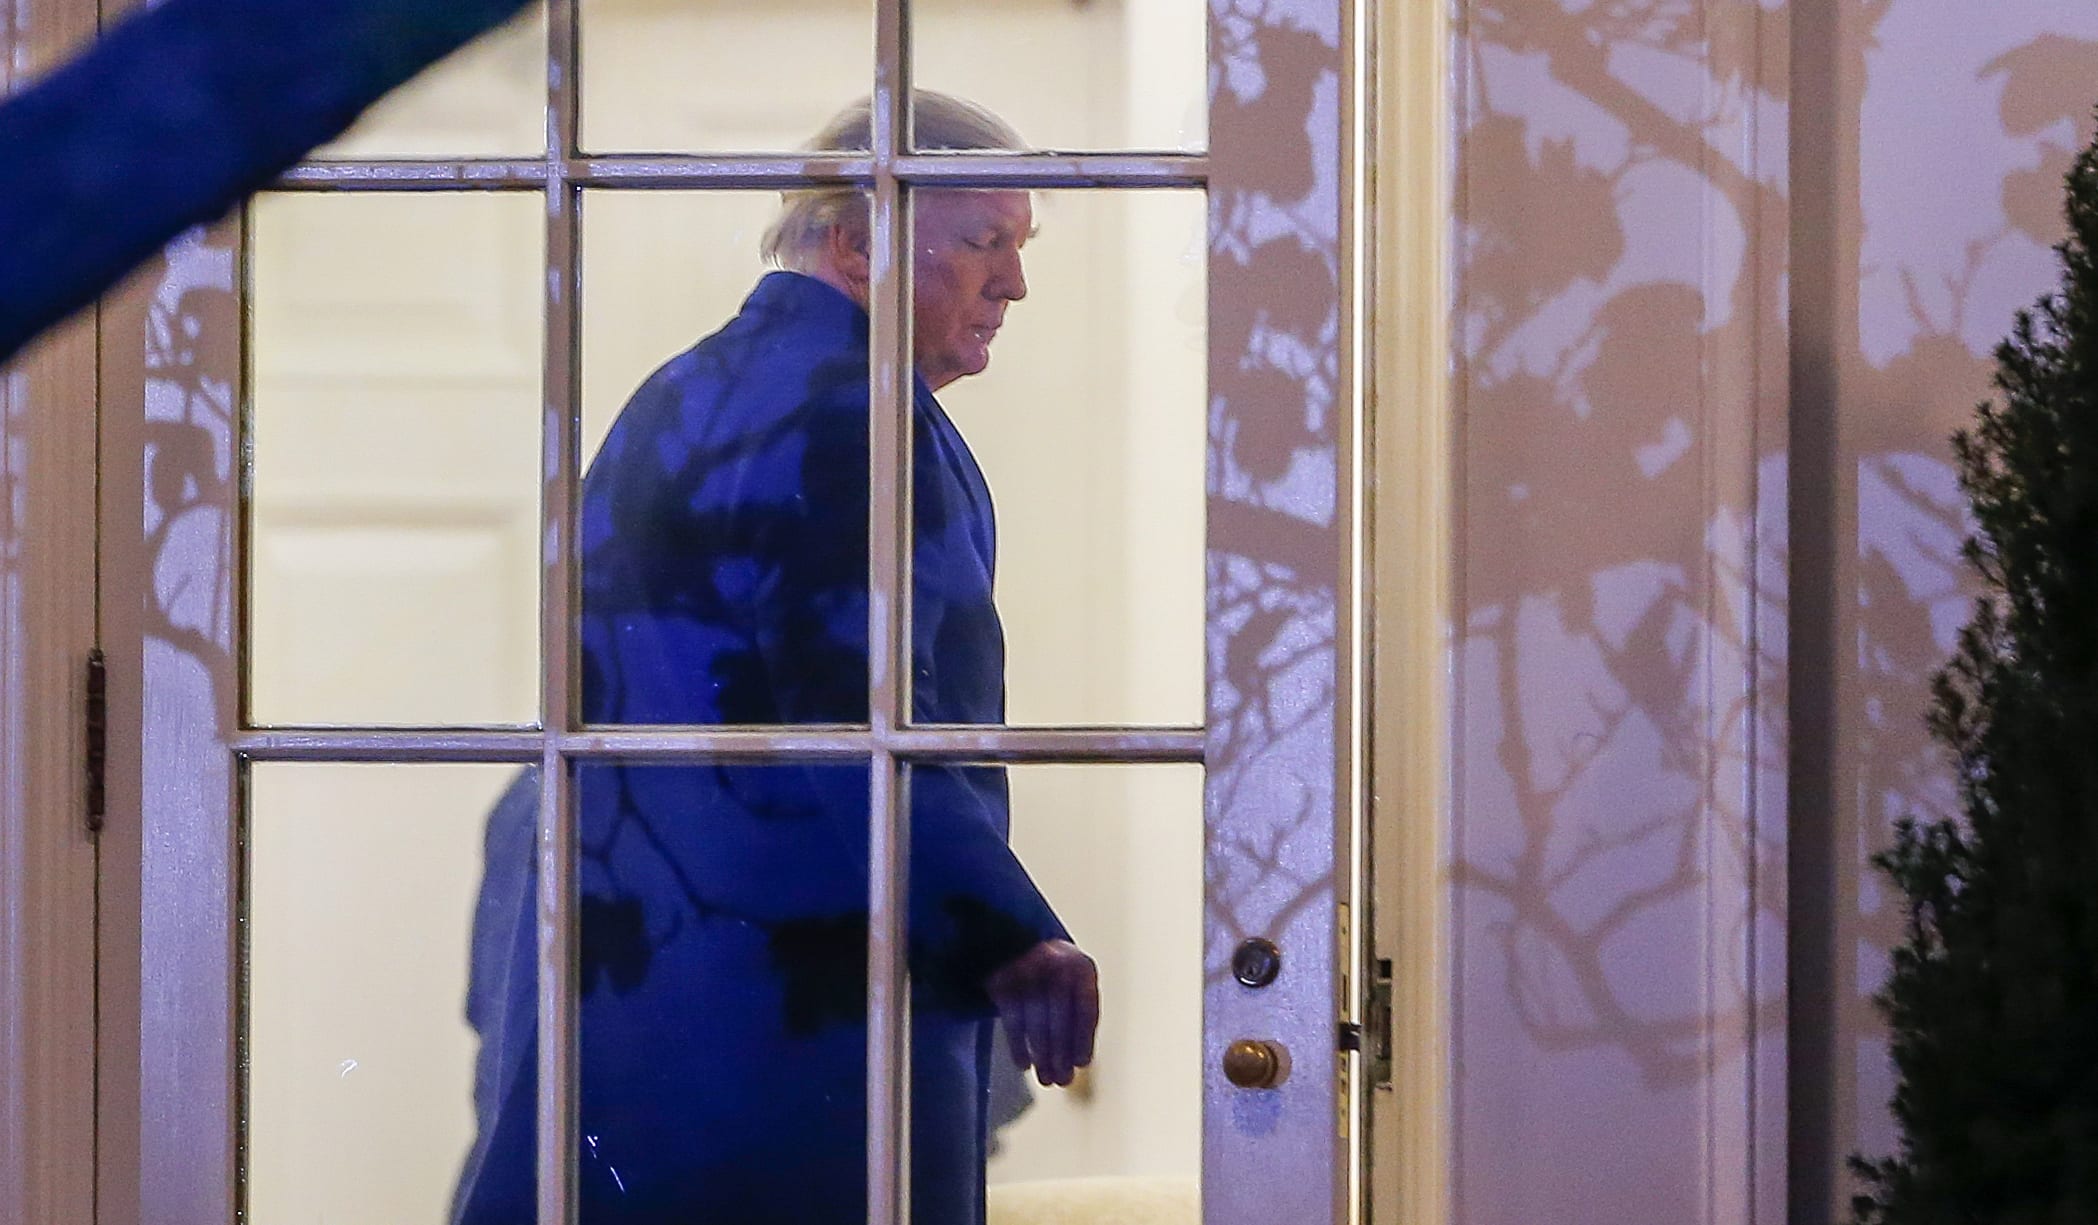 President Donald Trump returns to the White House after a weekend at his Palm Beach, Florida.